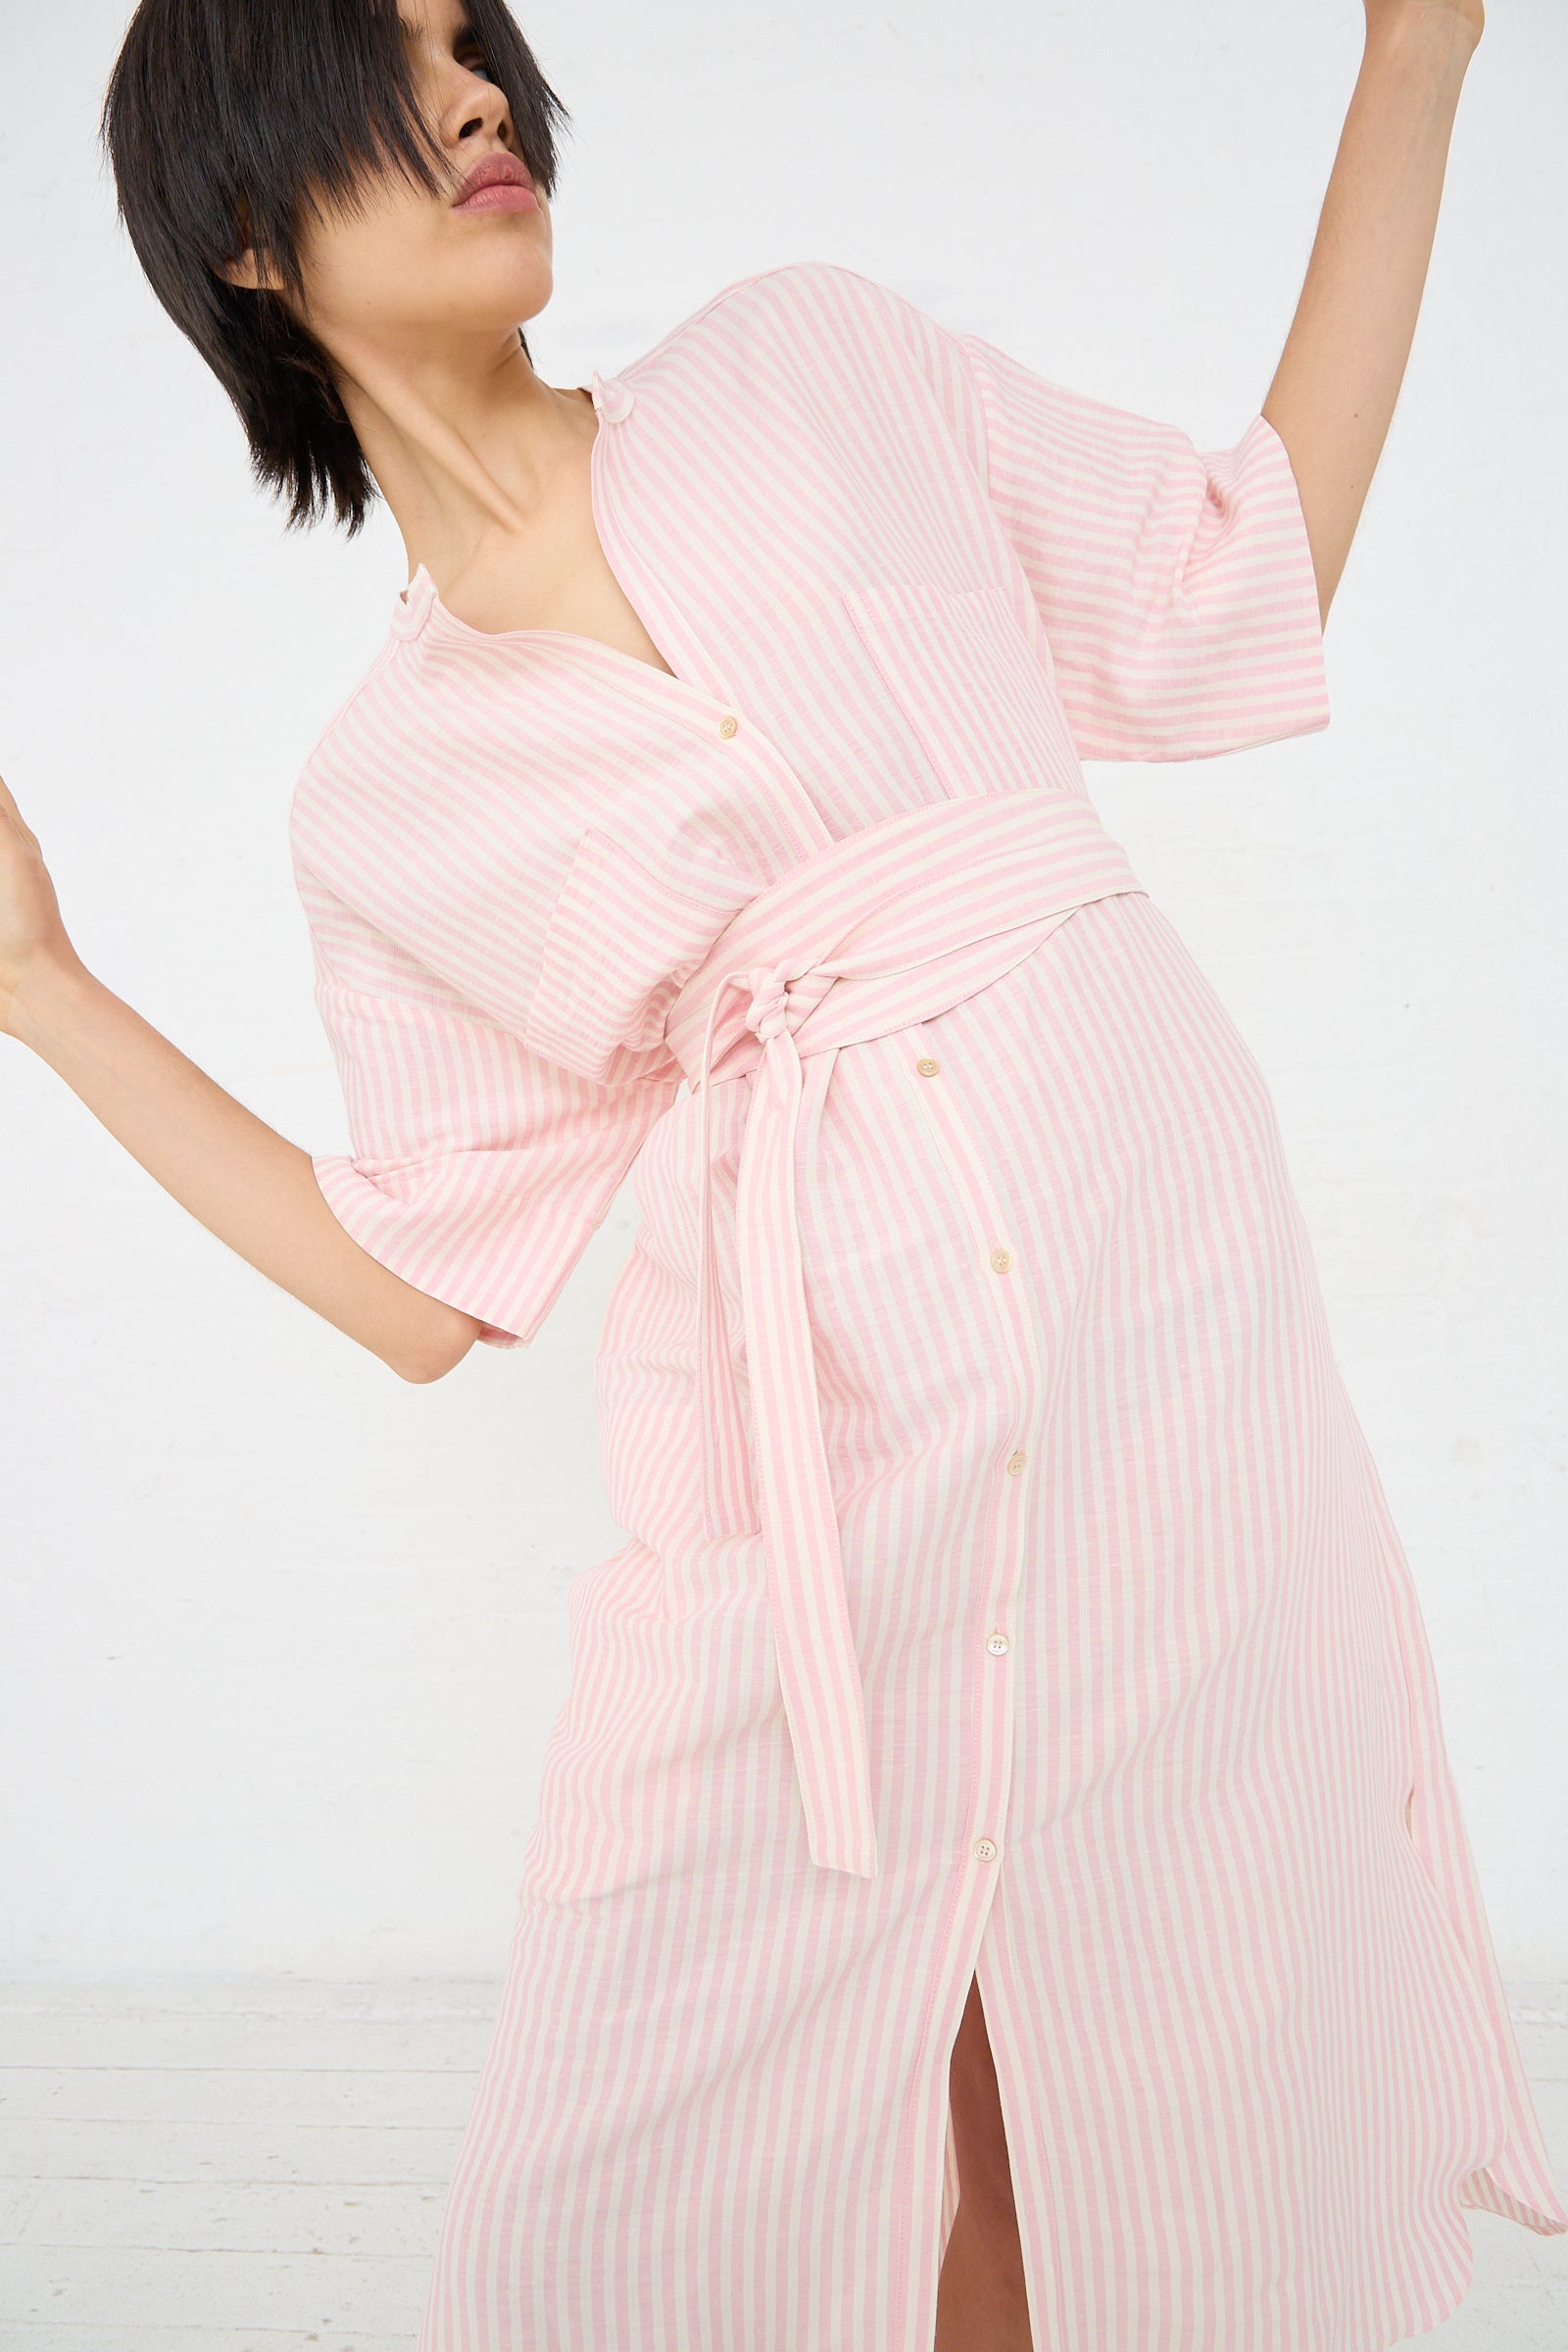 Woman posing in a Linen Stripe Kalloni Dress in Pink by Caron Callahan, an oversized shirt dress with a striped pink and white linen blend fabric and a knotted waist detail.